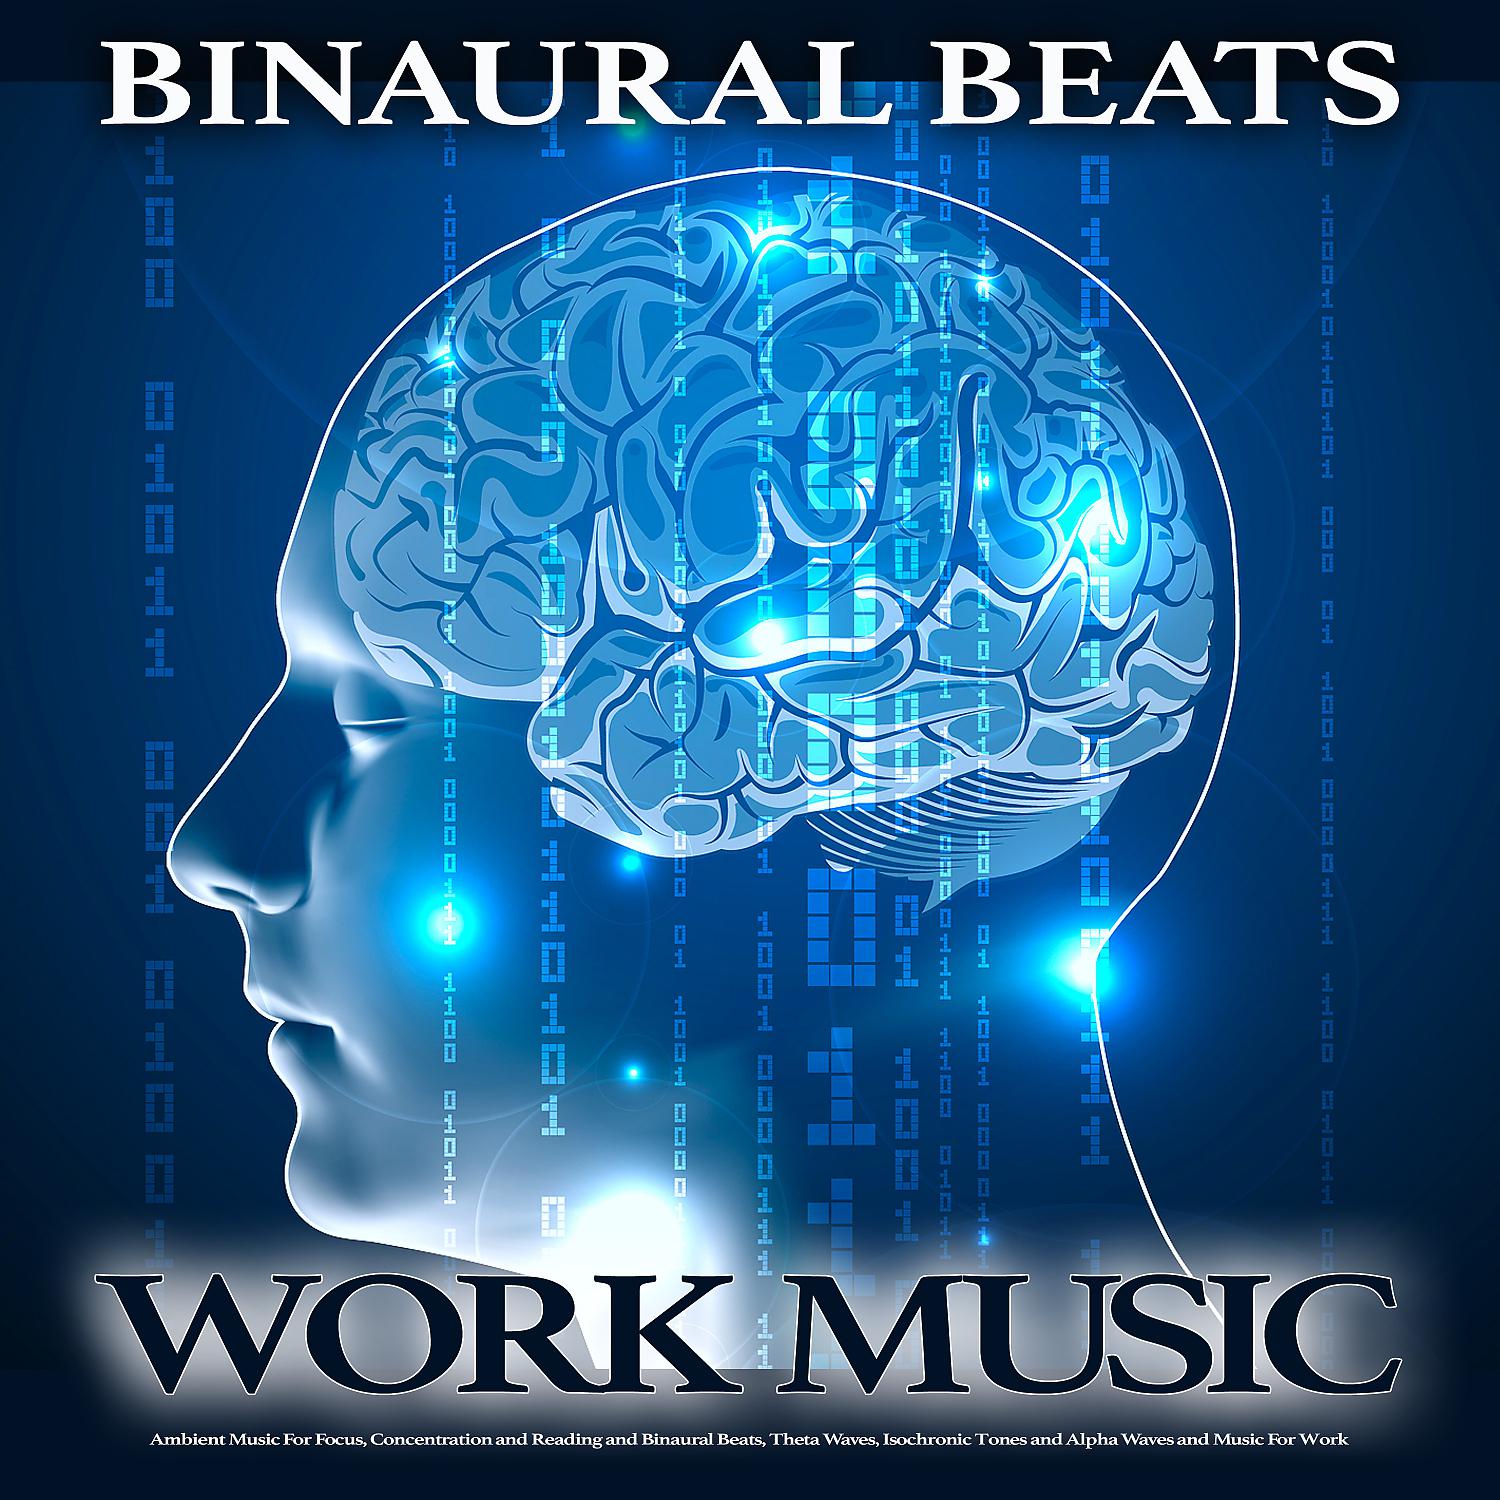 Постер альбома Binaural Beats Work Music: Ambient Music For Focus, Concentration and Reading and Binaural Beats, Theta Waves, Isochronic Tones and Alpha Waves and Music For Work